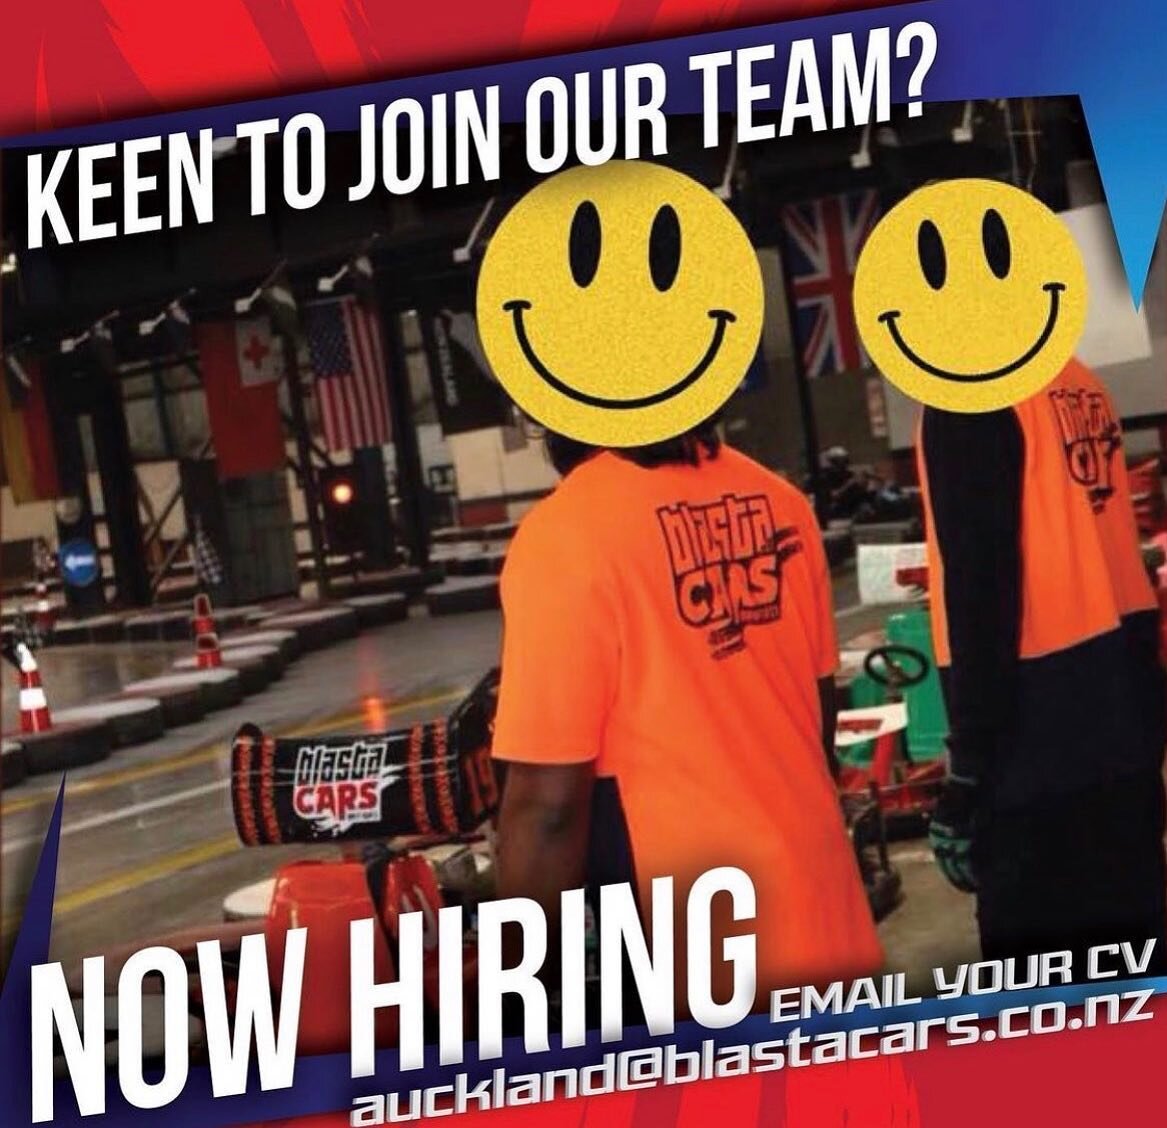 We are looking for some new team members to join the crew! 

Part-time positions available.

If you think you have what it takes to work in a fast paced , fun, enjoyable working environment then send your CV through now.

*must be 18 or older 
*have 